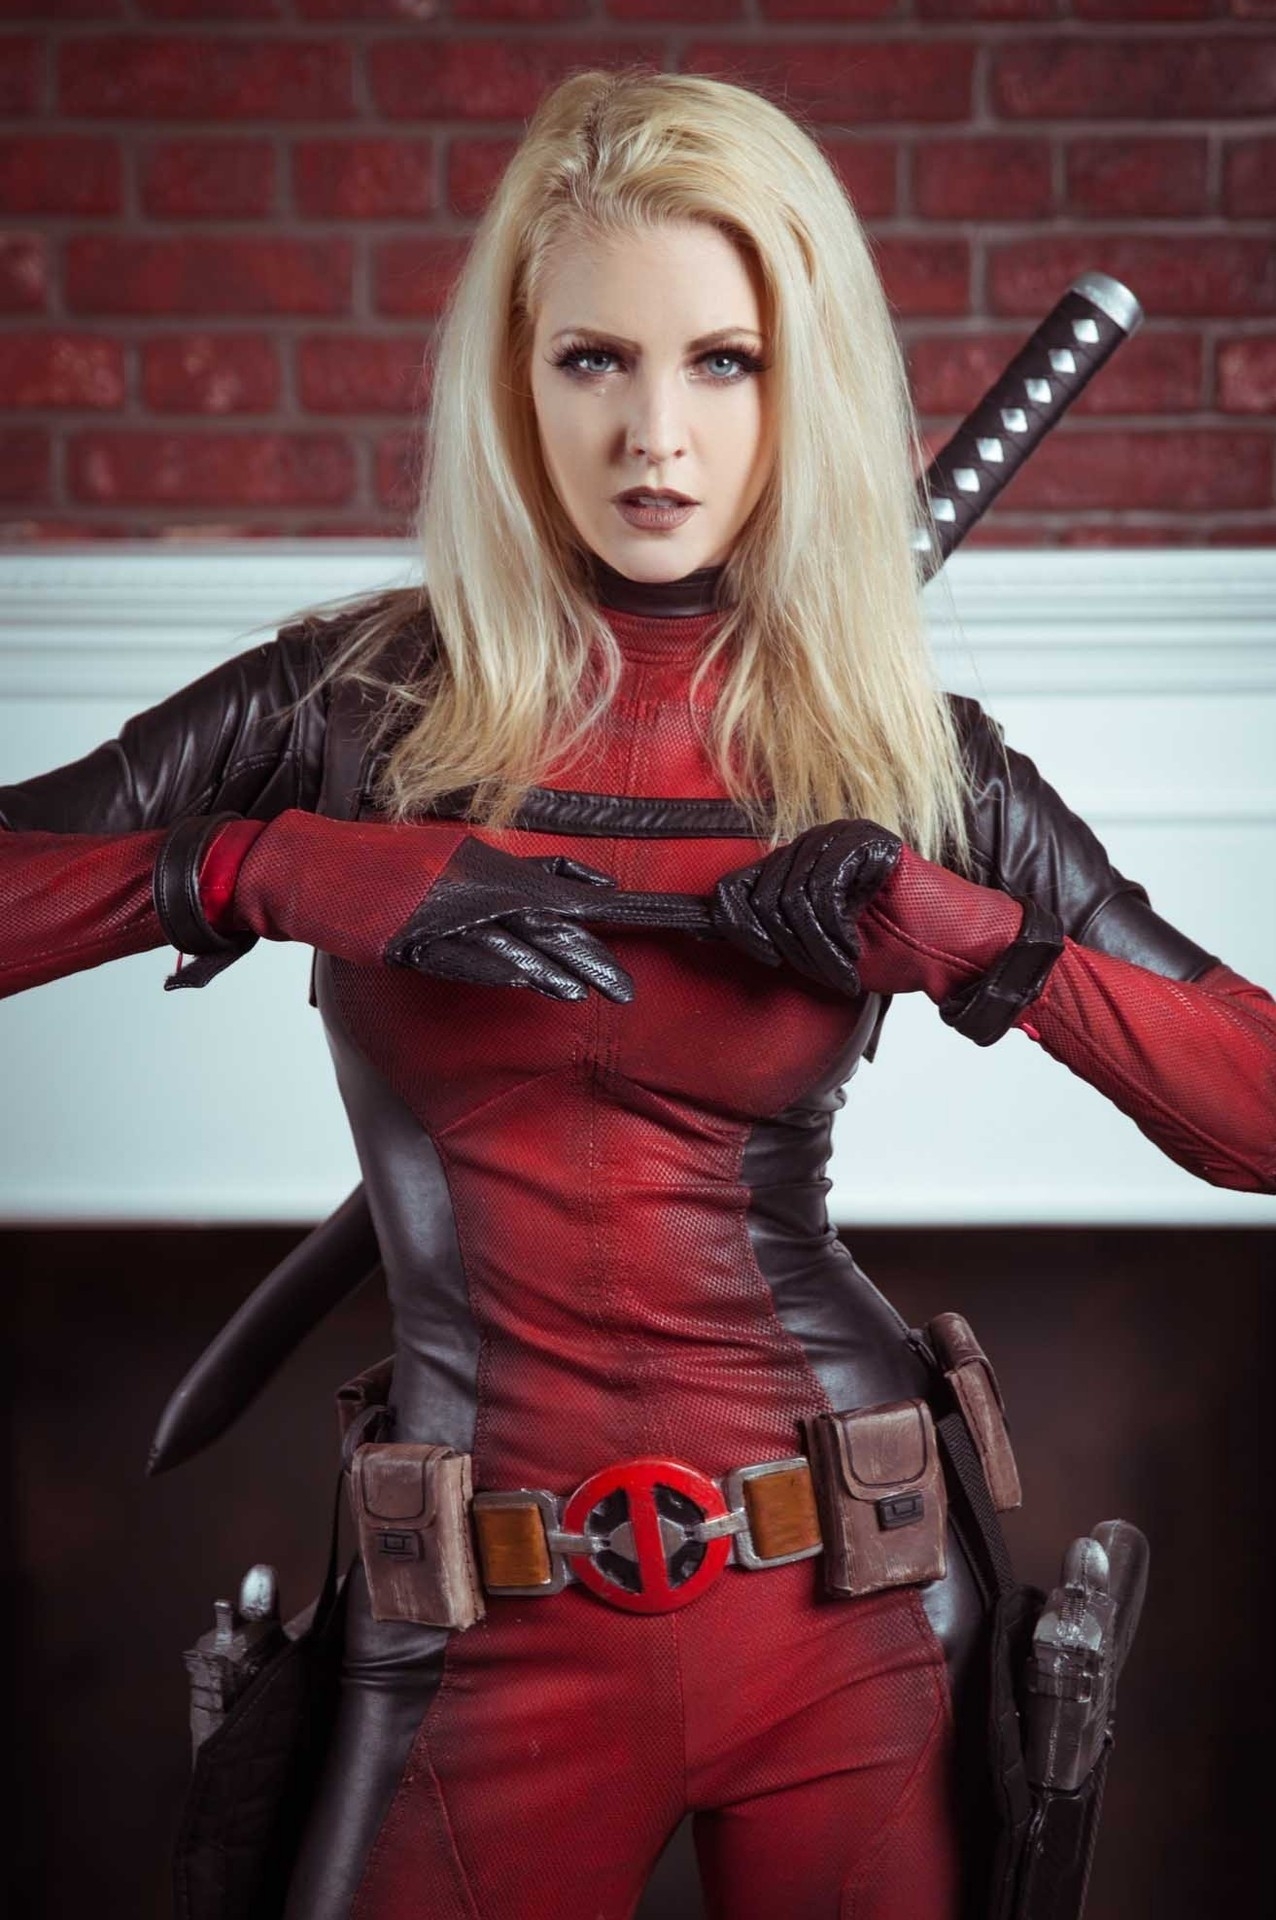 Maid of Might - Lady Deadpool 2